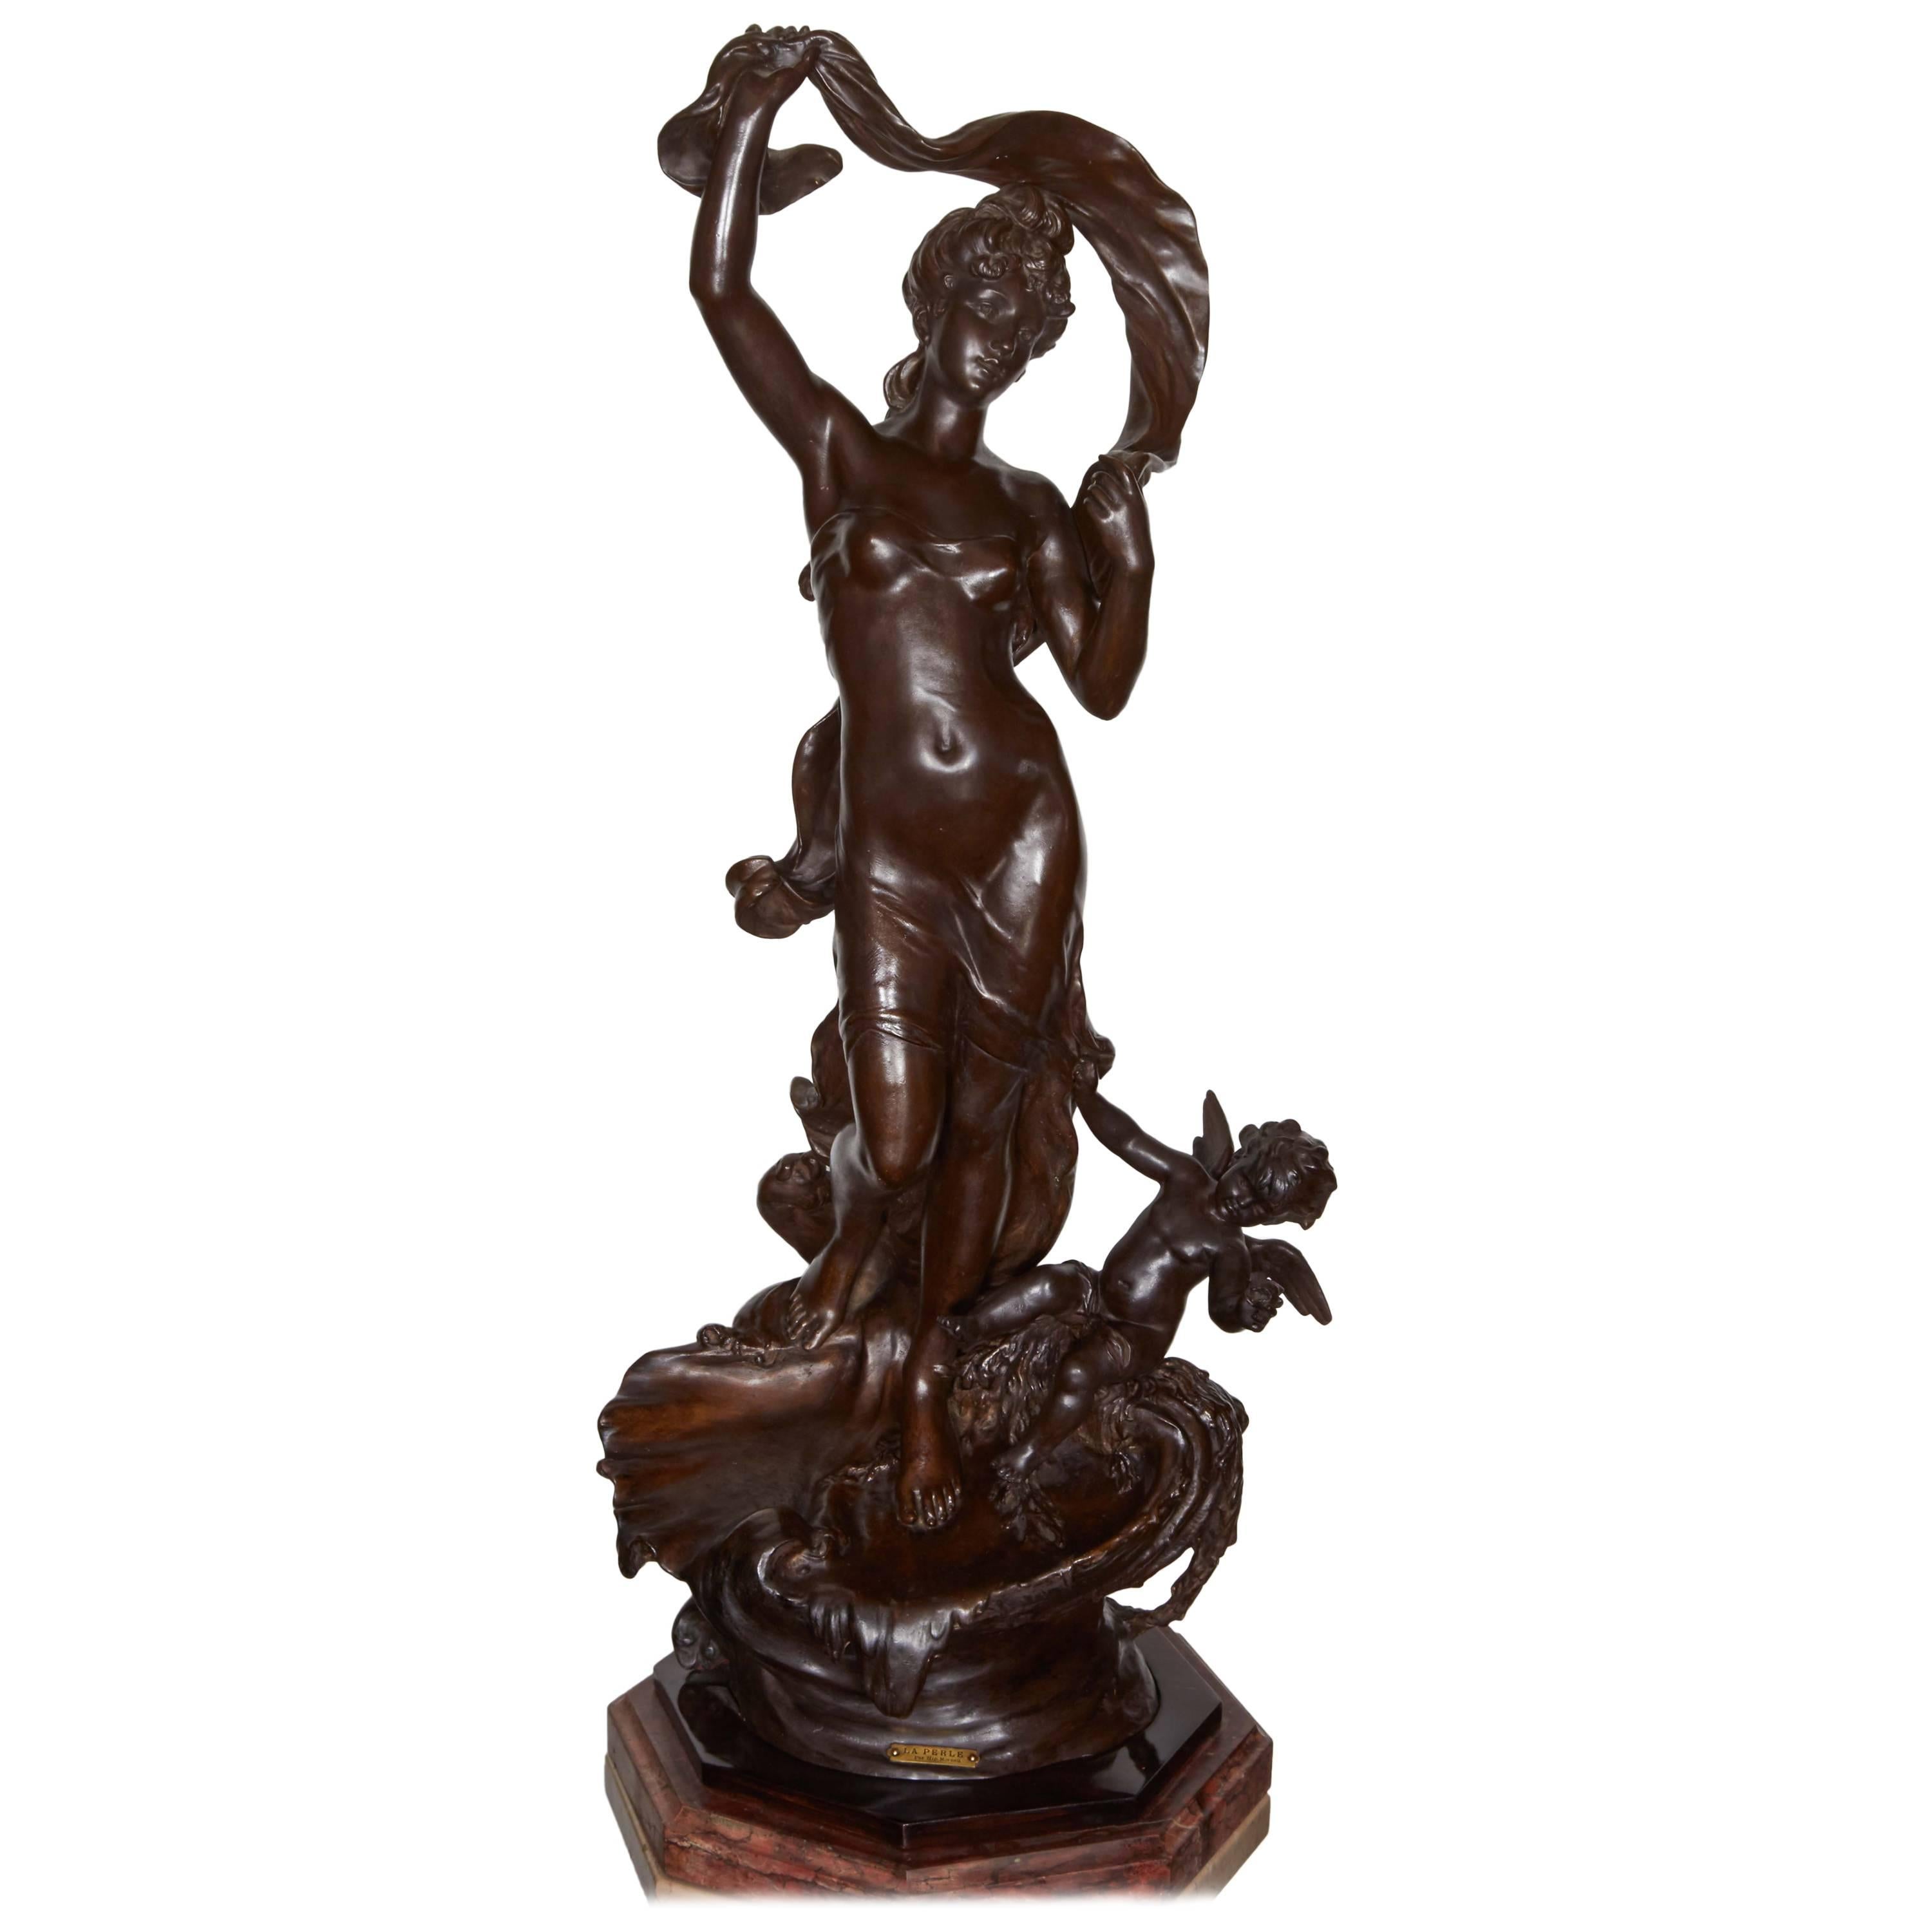 French late 19th century spelter sculpture by Hippolyte Moreau fitted with original 1 7/8